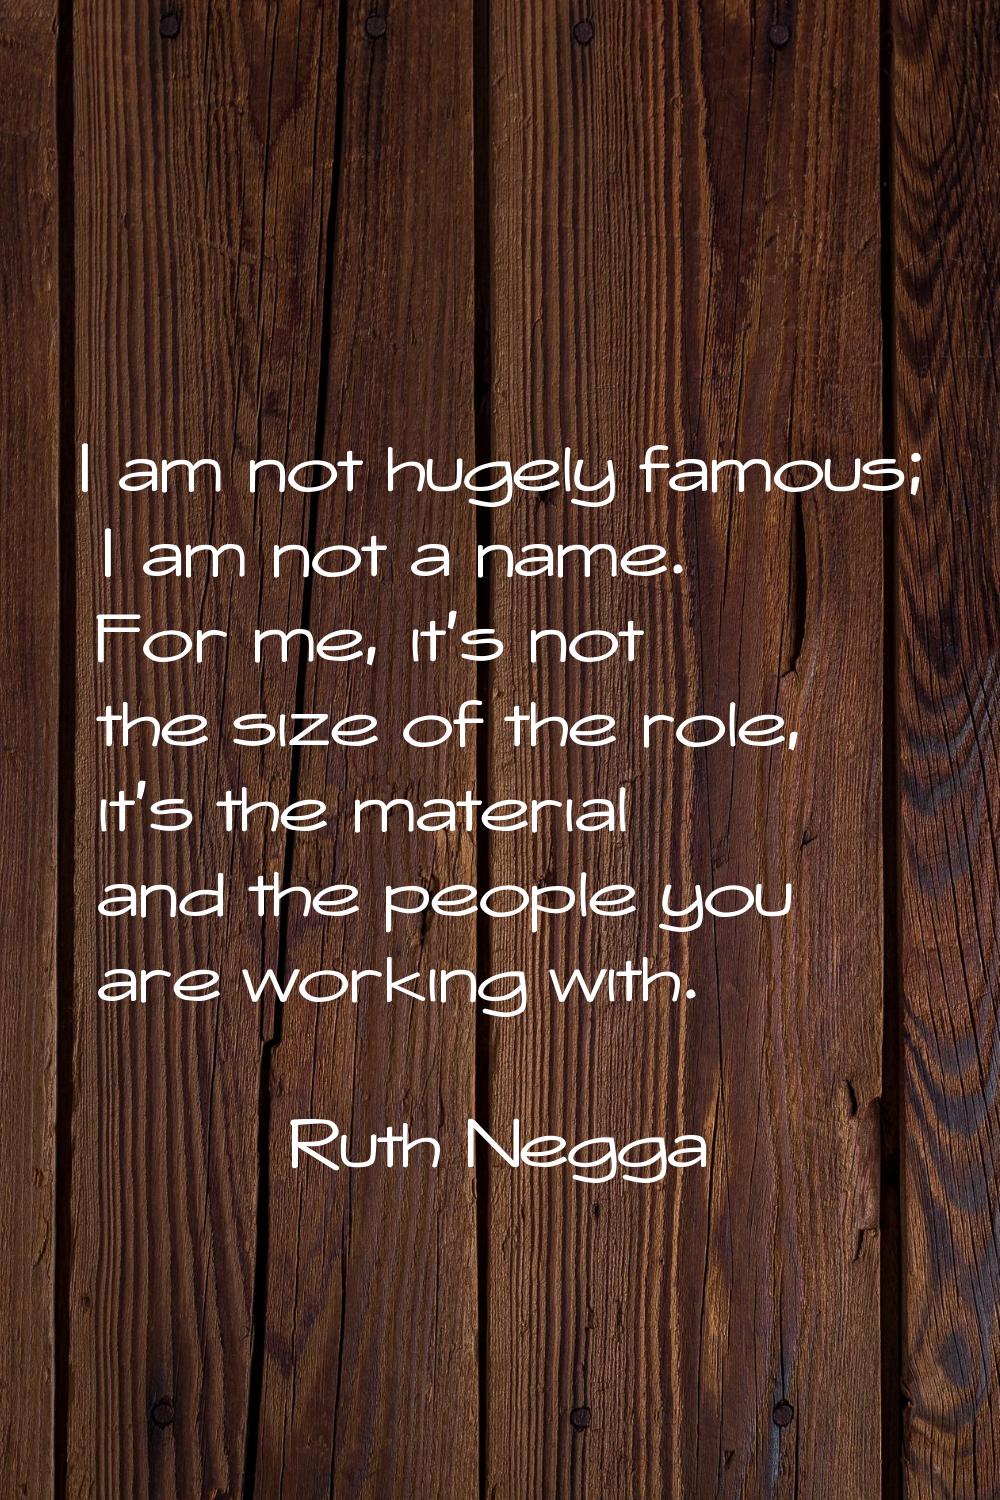 I am not hugely famous; I am not a name. For me, it's not the size of the role, it's the material a